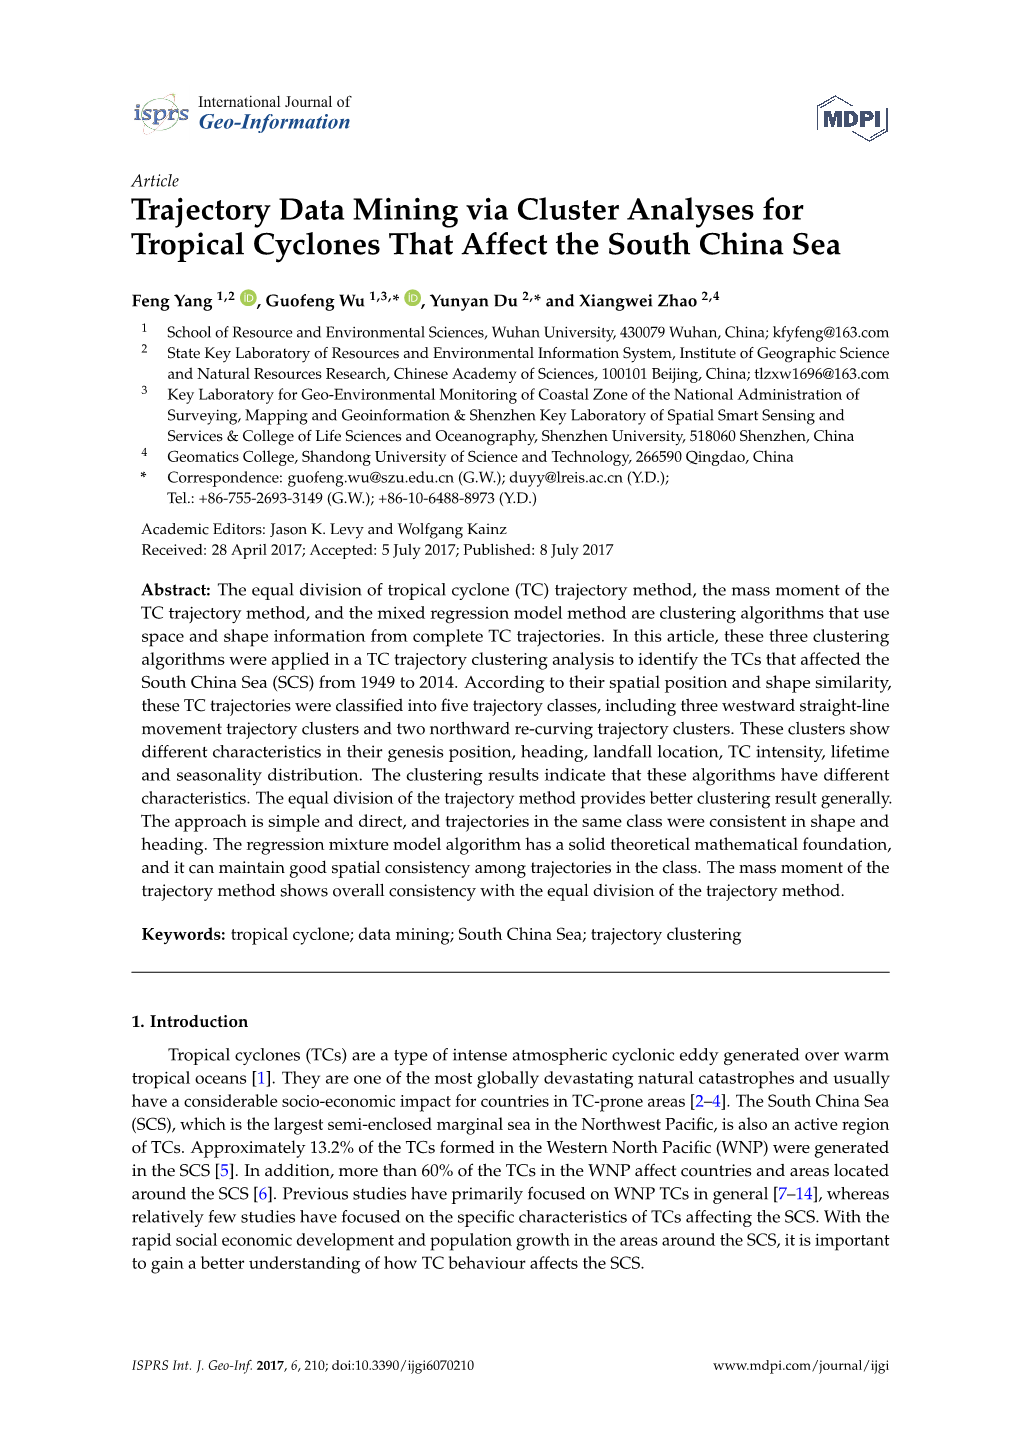 Trajectory Data Mining Via Cluster Analyses for Tropical Cyclones That Affect the South China Sea